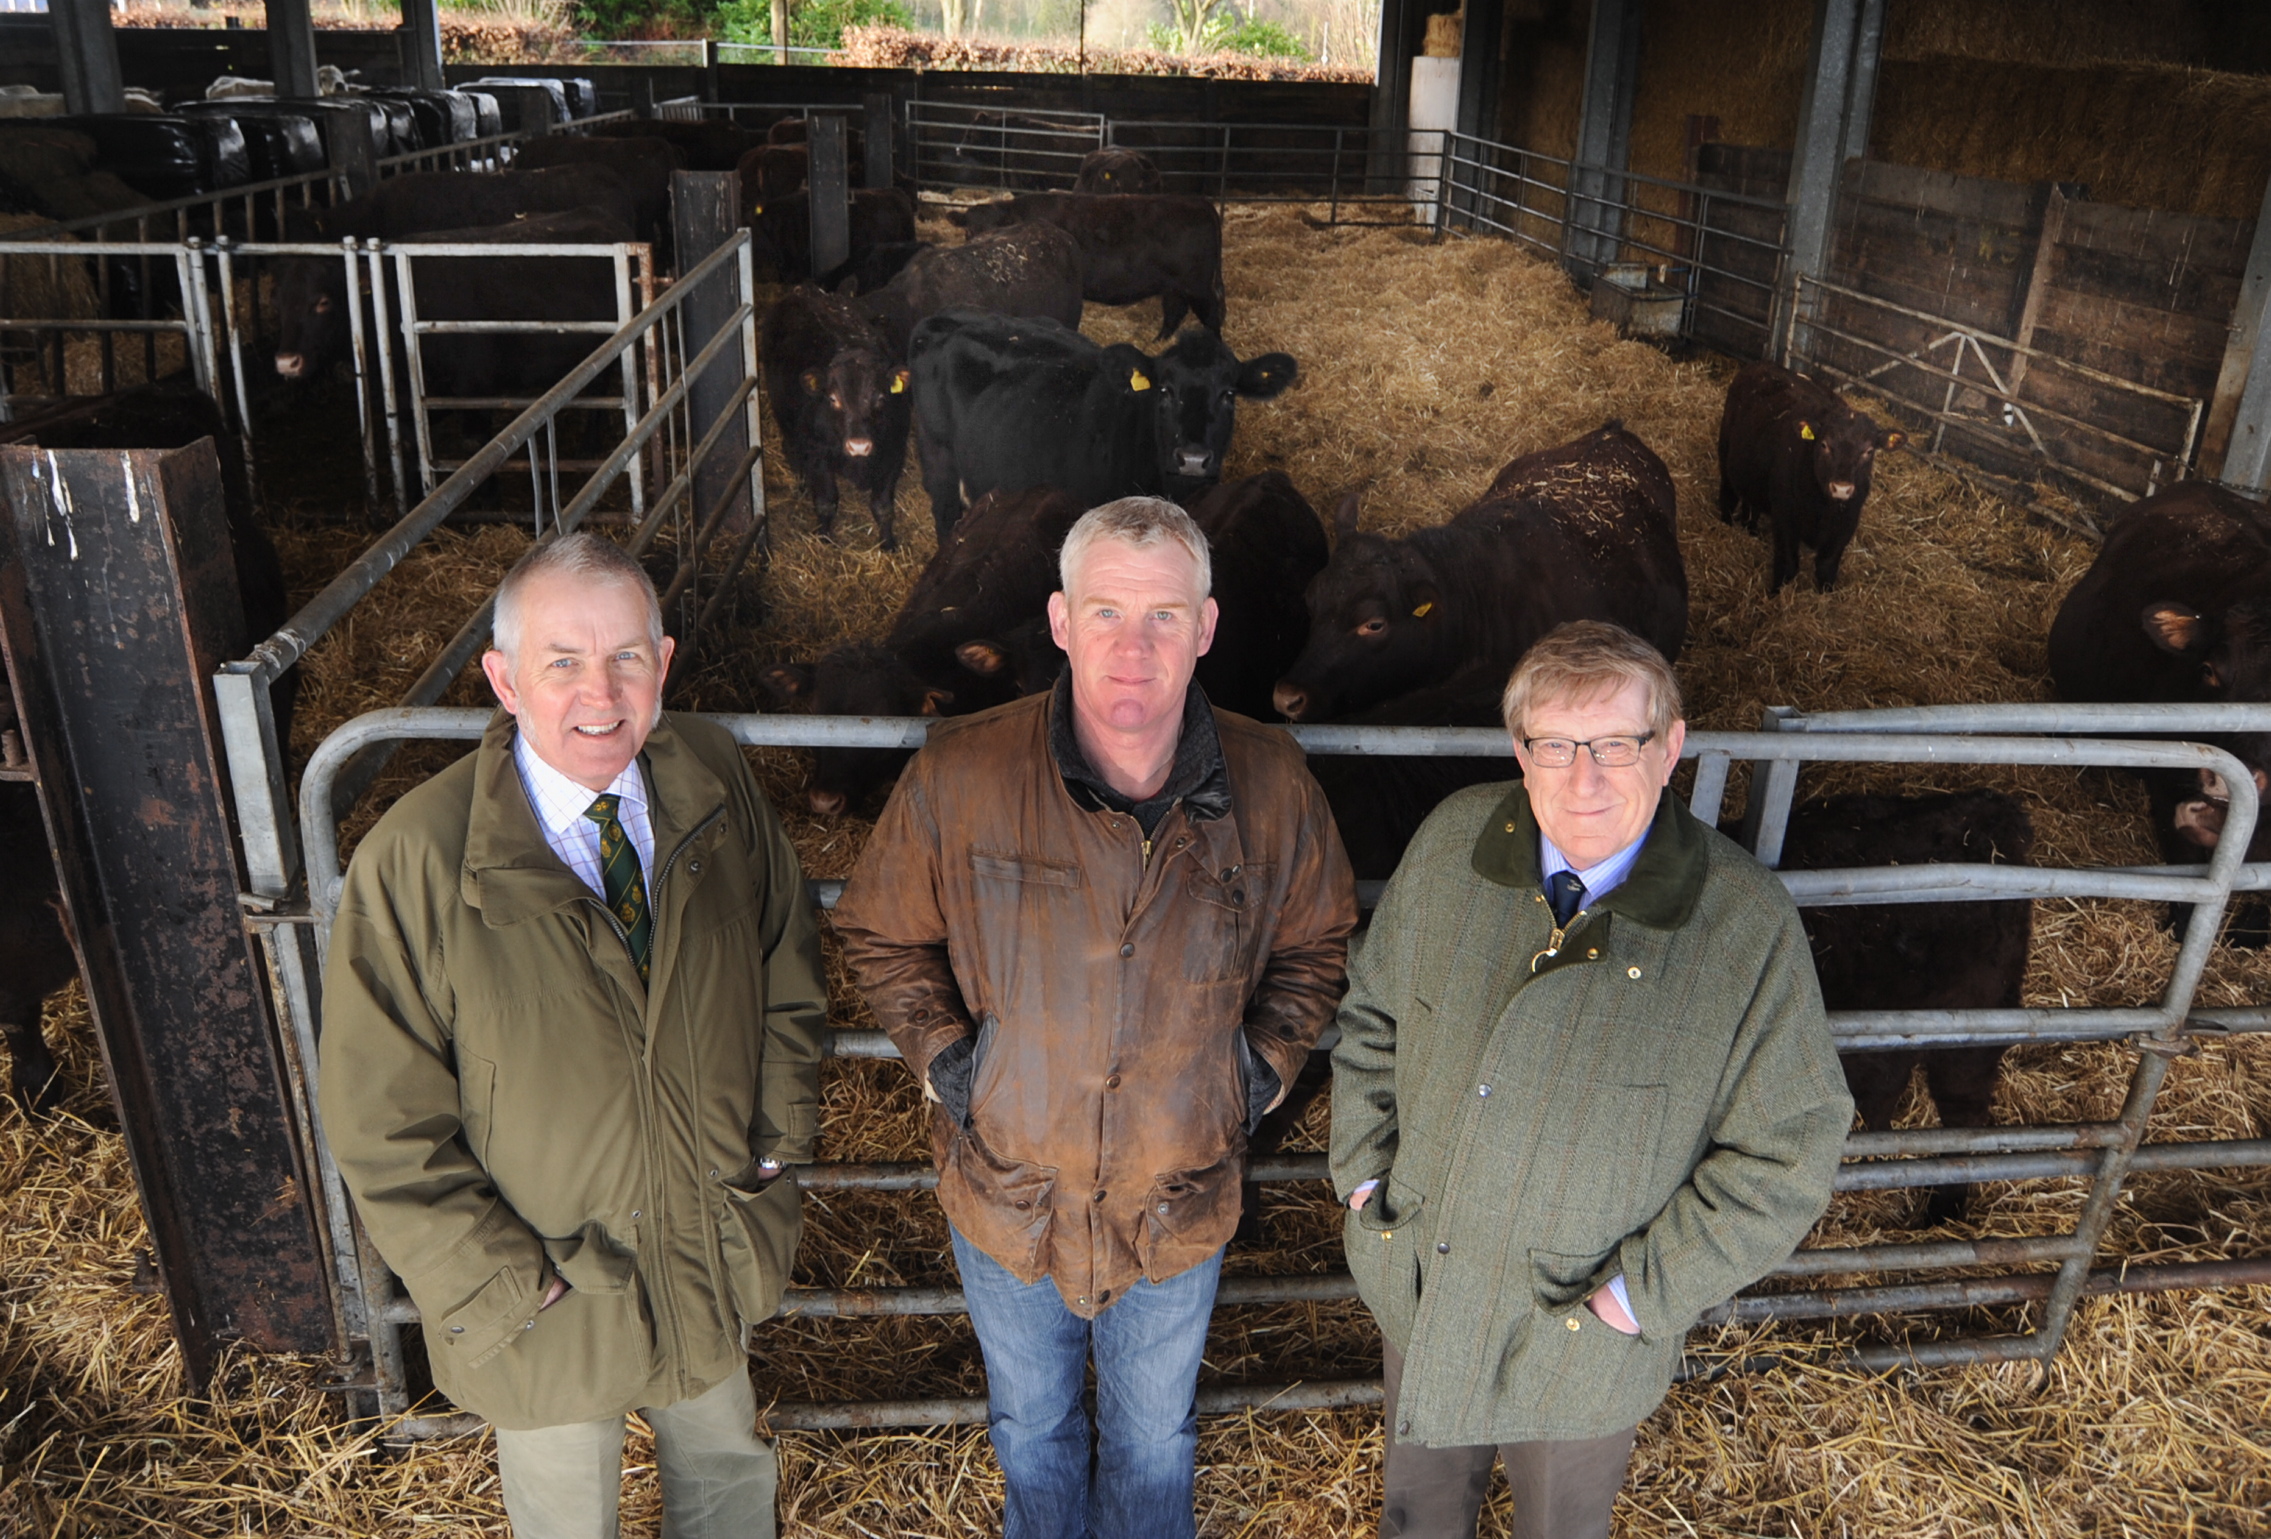 left to right - Gordon Gatward, Charlie Weetman and Richard Fonge from the Kenilworth Show organising committee 